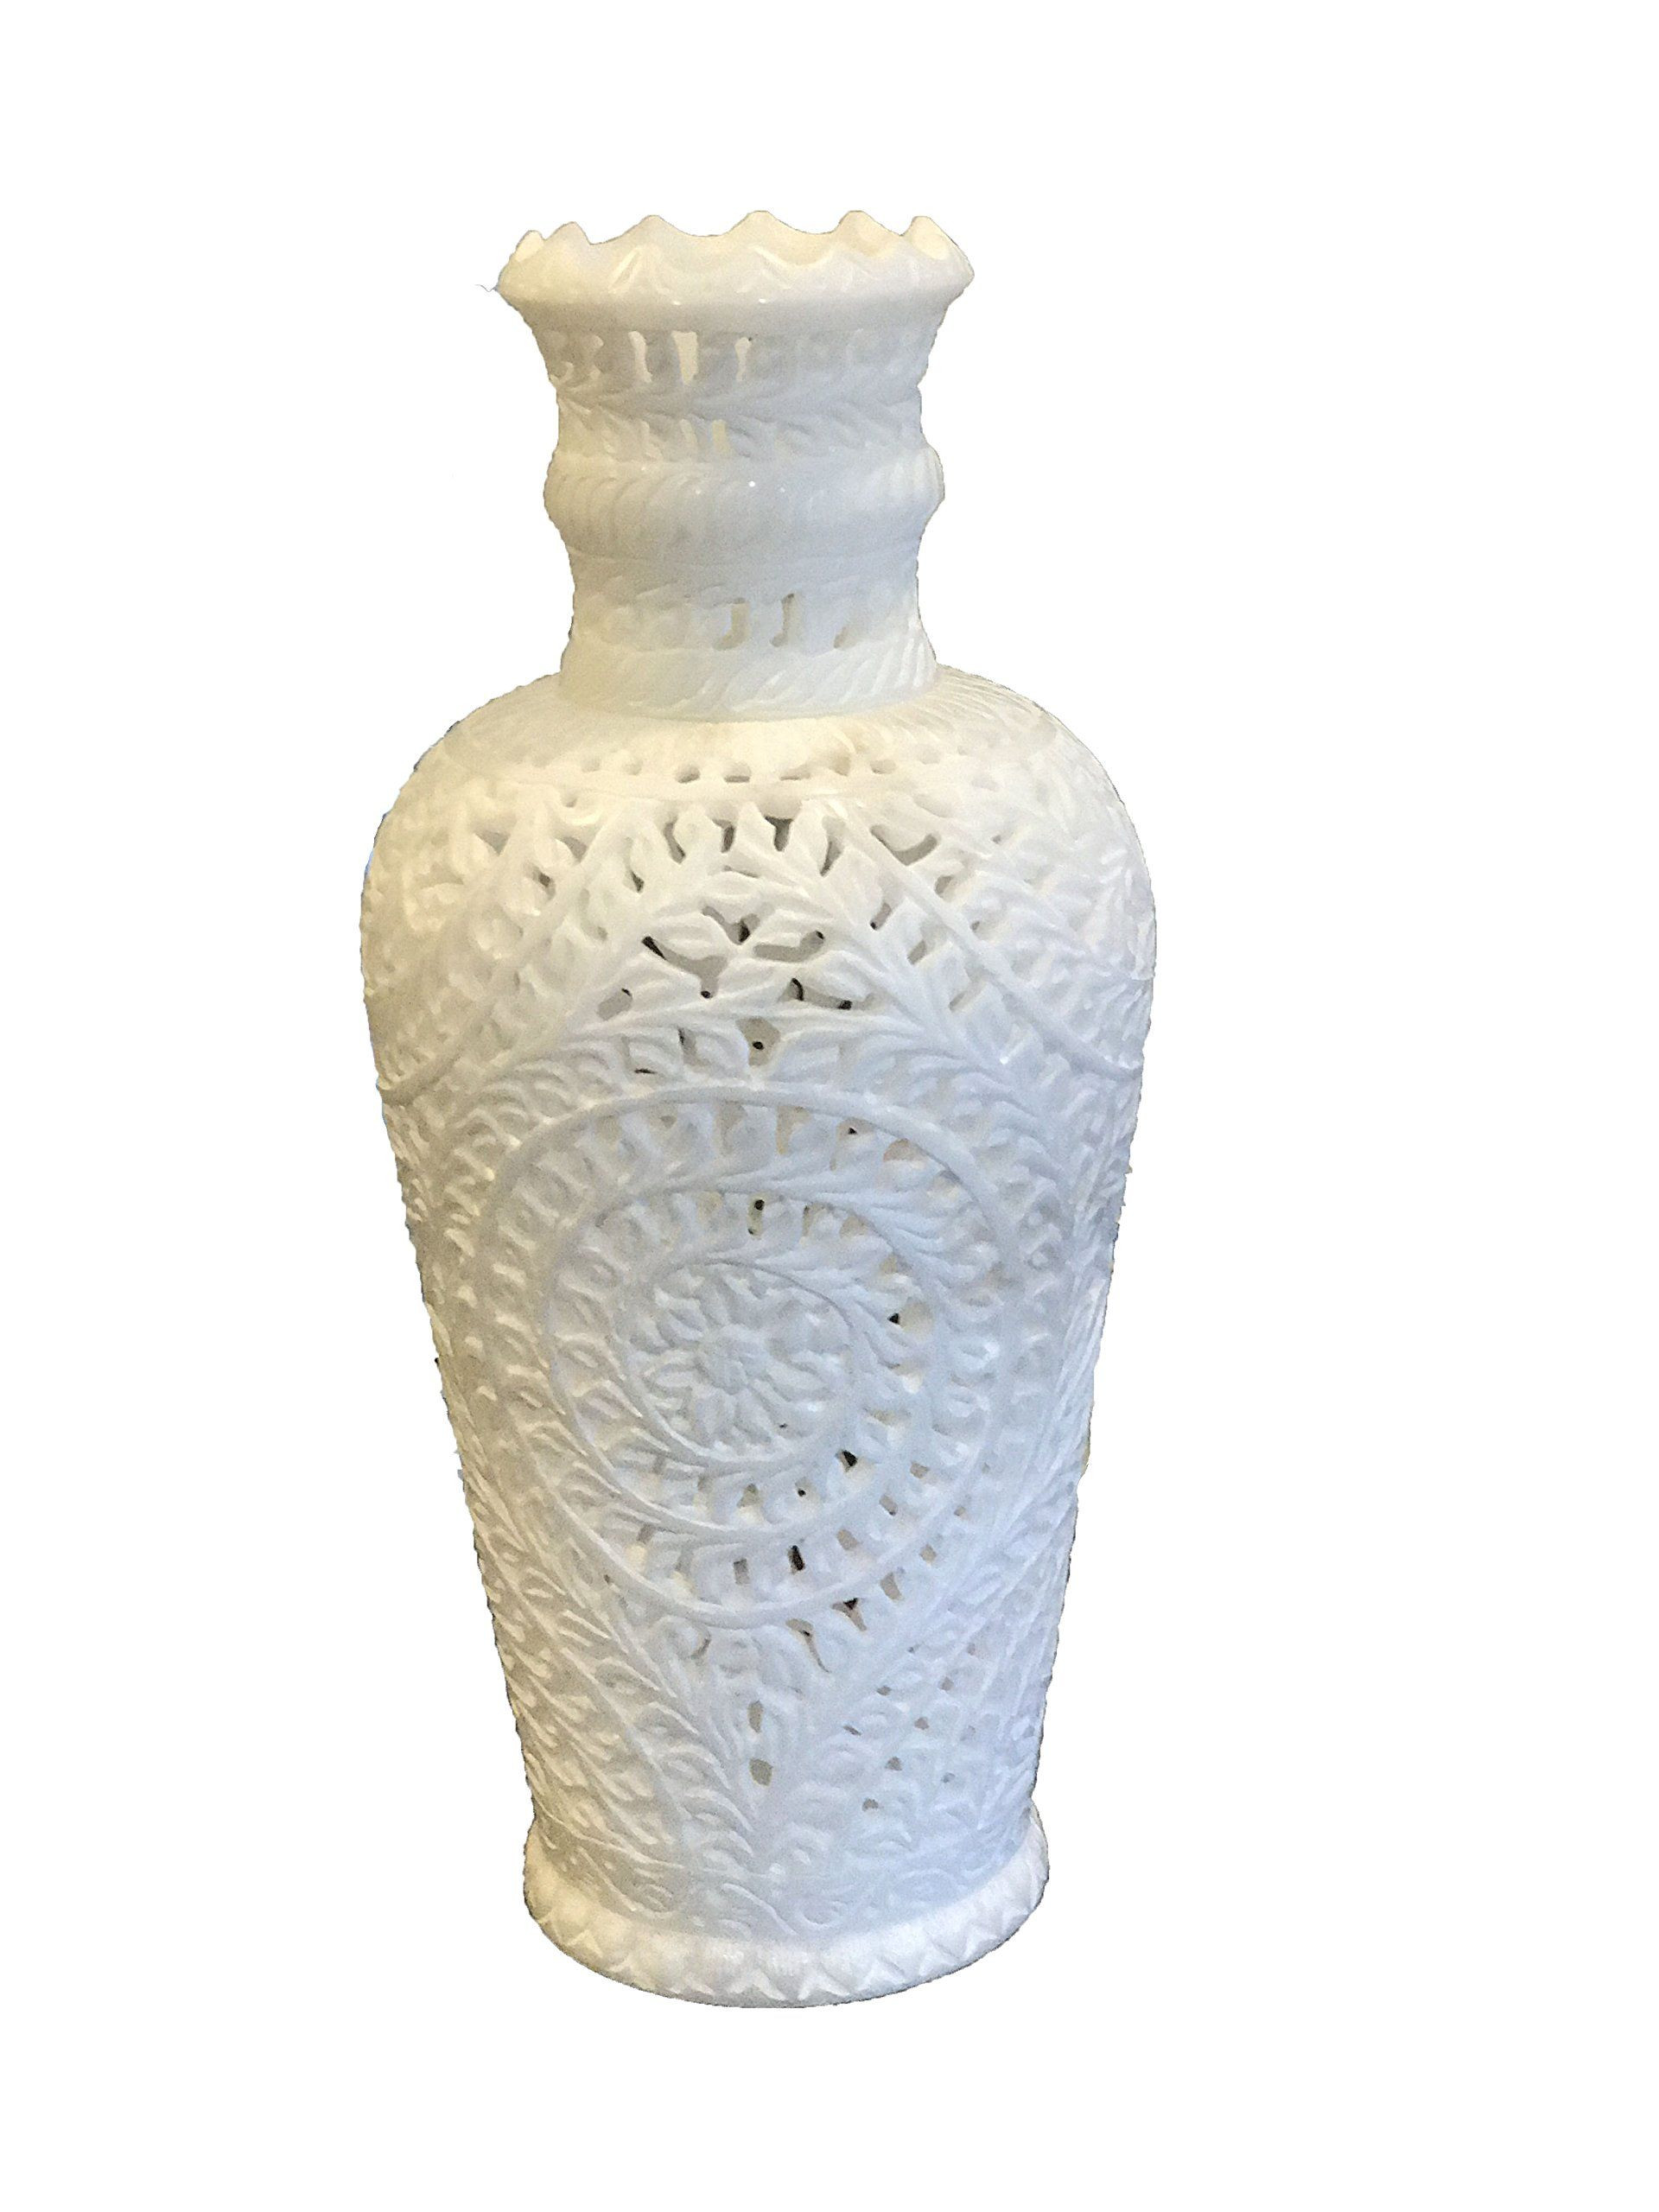 diy vases for weddings of white marble flower vase handcrafted stone decorative wedding diy regarding white marble flower vase handcrafted stone decorative wedding diy vases handcrafted by artisans this